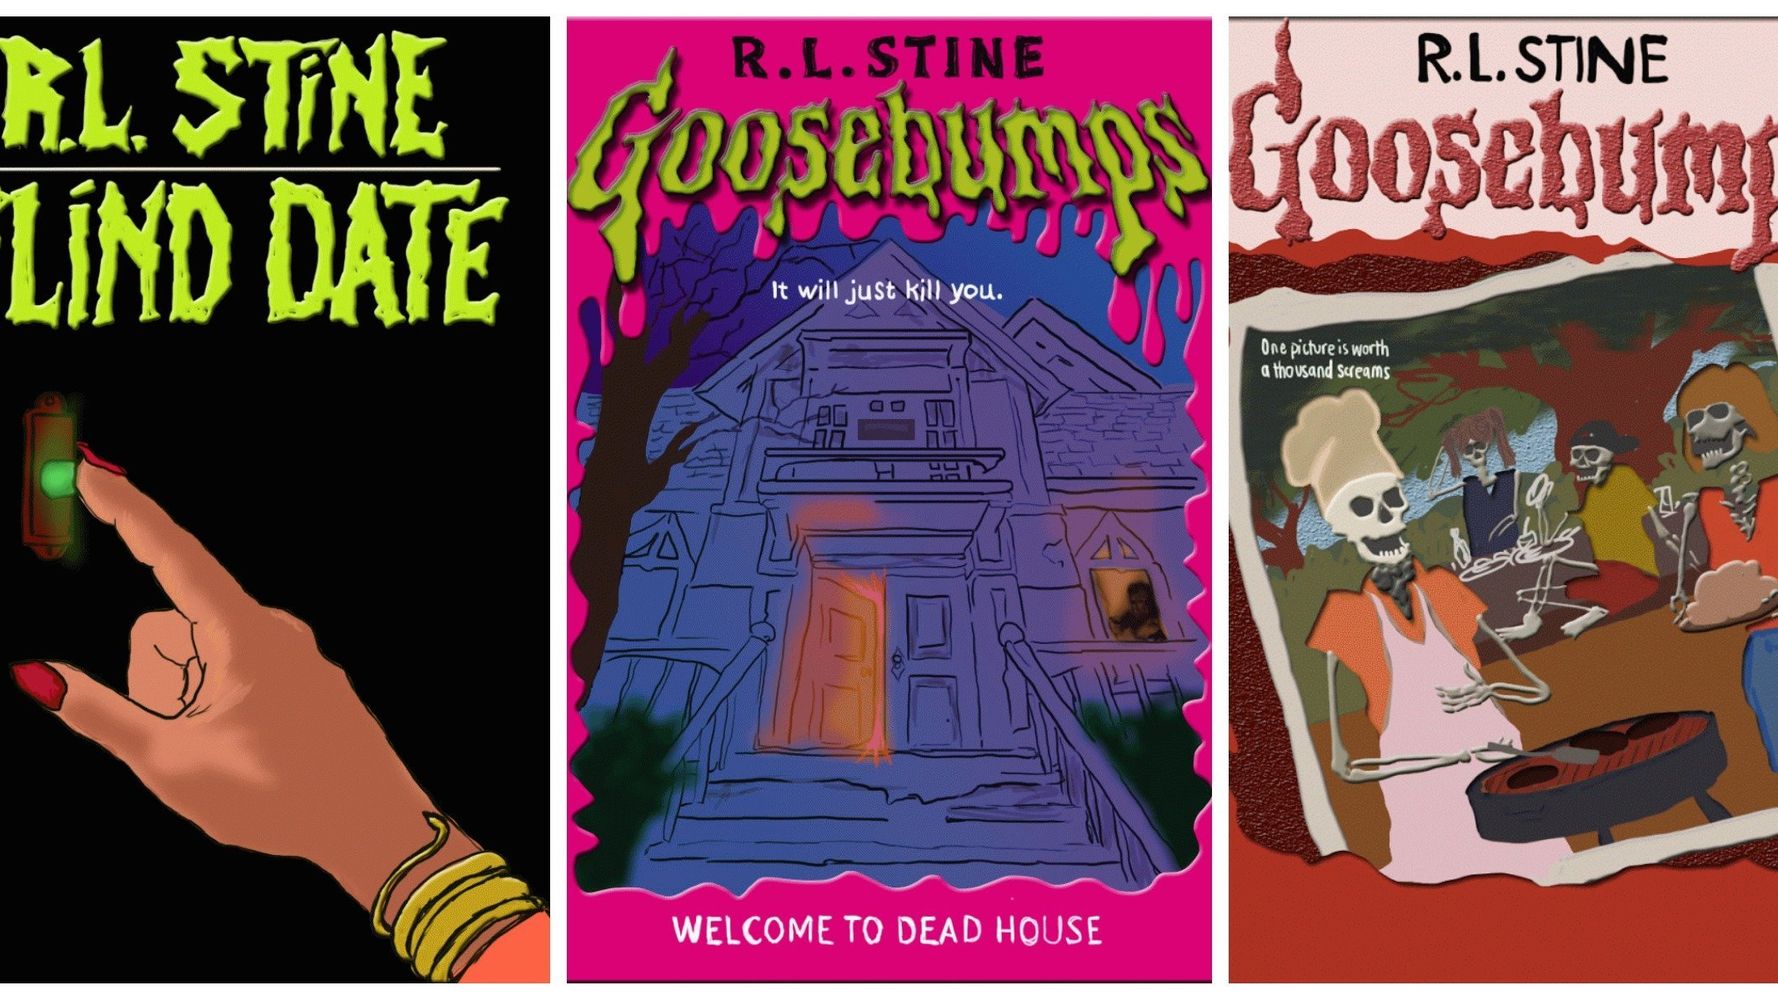 Goosebumps Cartoon Porn Gay Boys - Read This And Die!: An Interview With R.L. Stine | HuffPost Entertainment